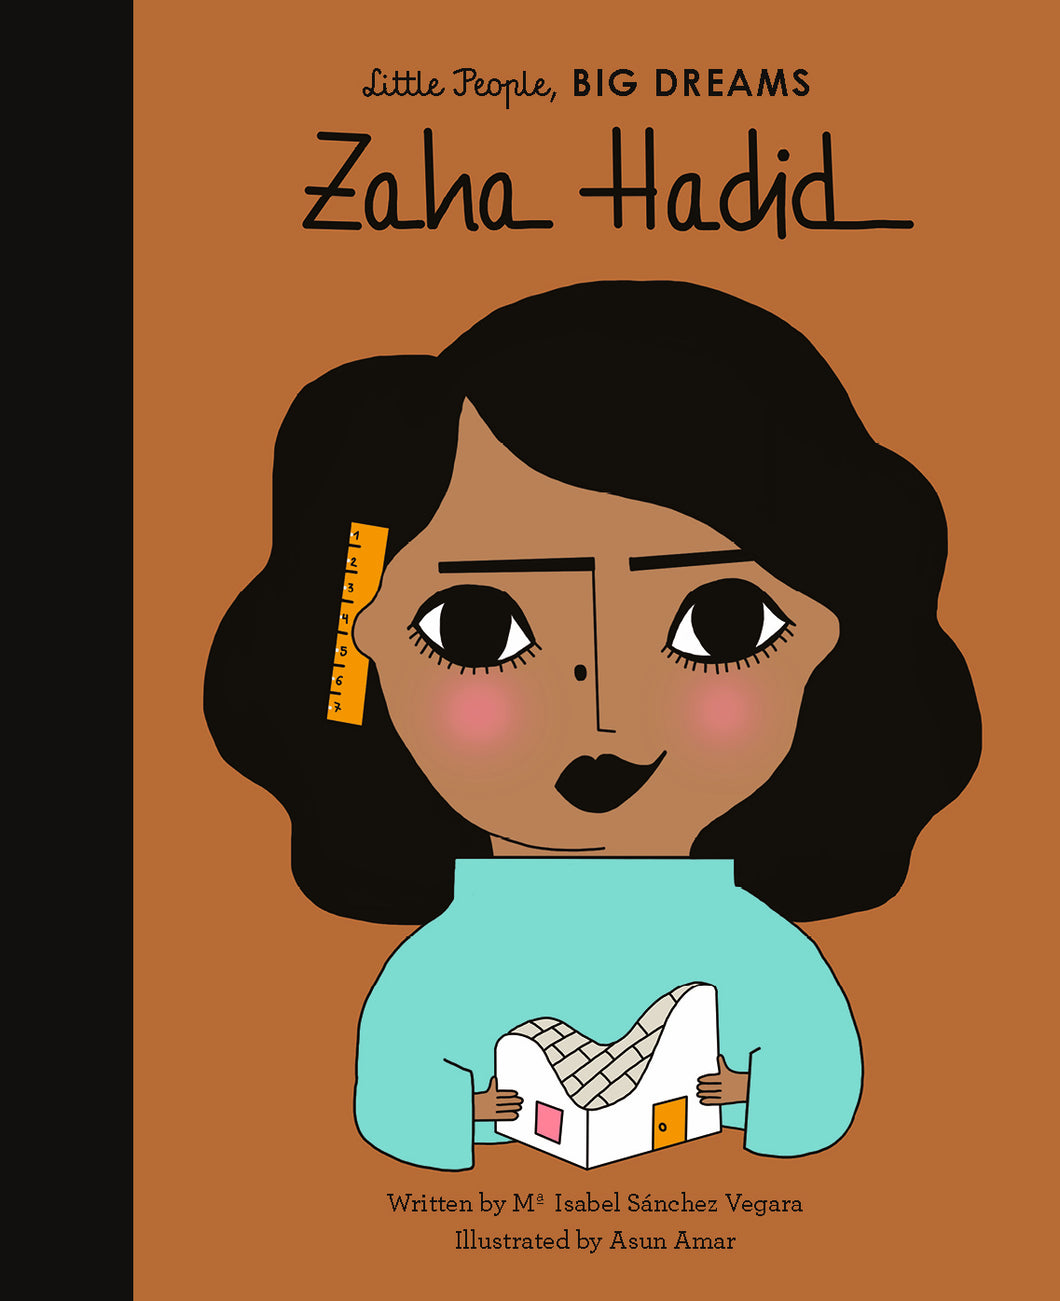 Brown book cover shows illustration of Zaha Hadid (a medium-skinned Muslim woman with black hair) holding onto a miniature building with a ruler behind her ear.